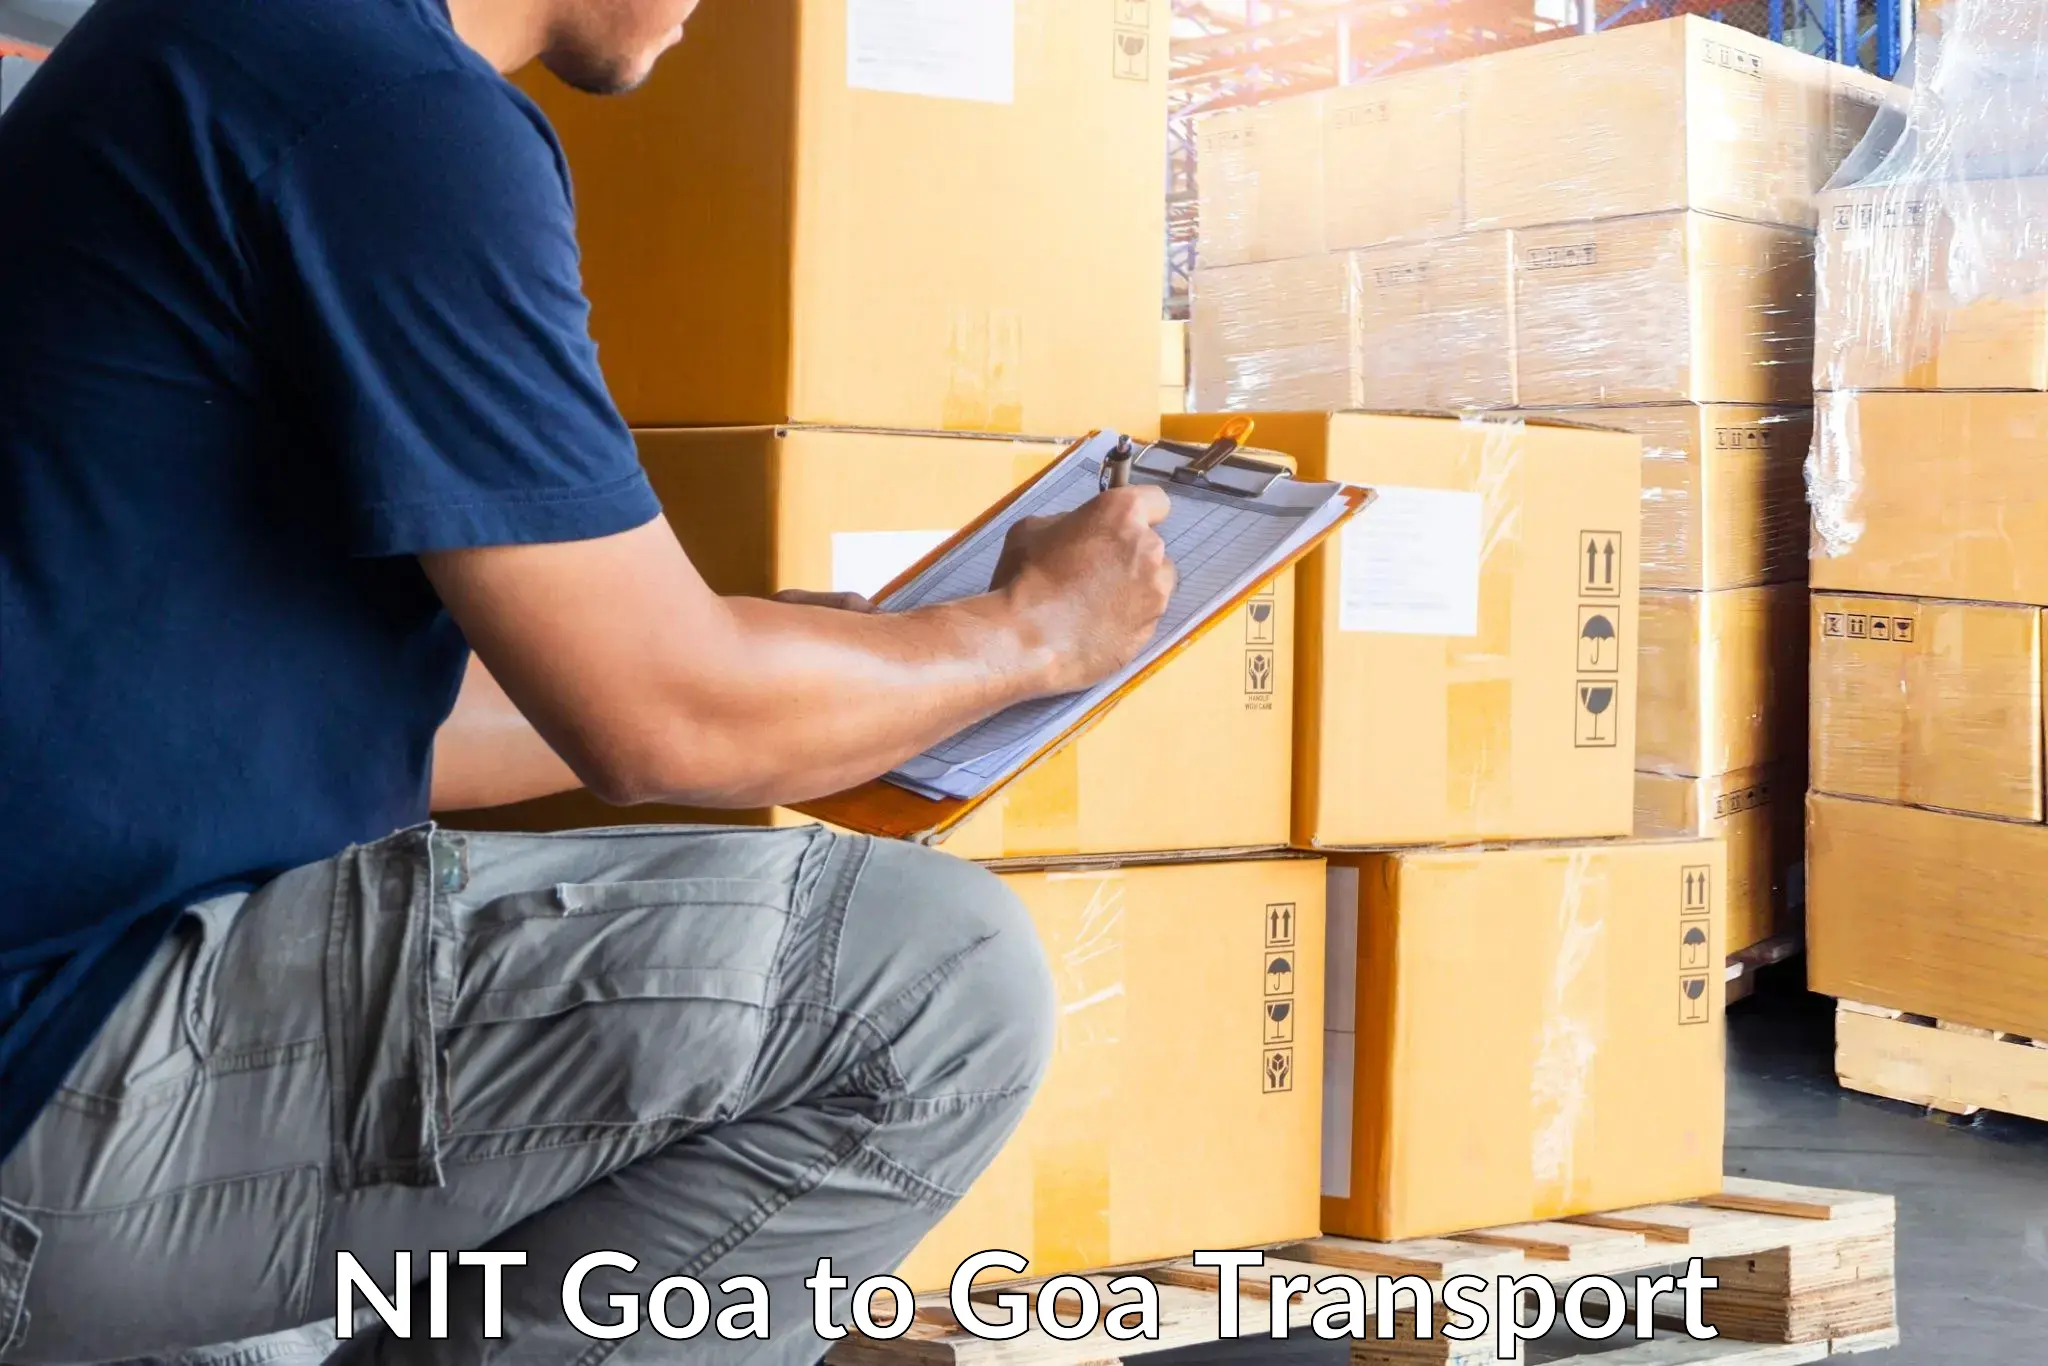 Transport bike from one state to another NIT Goa to IIT Goa